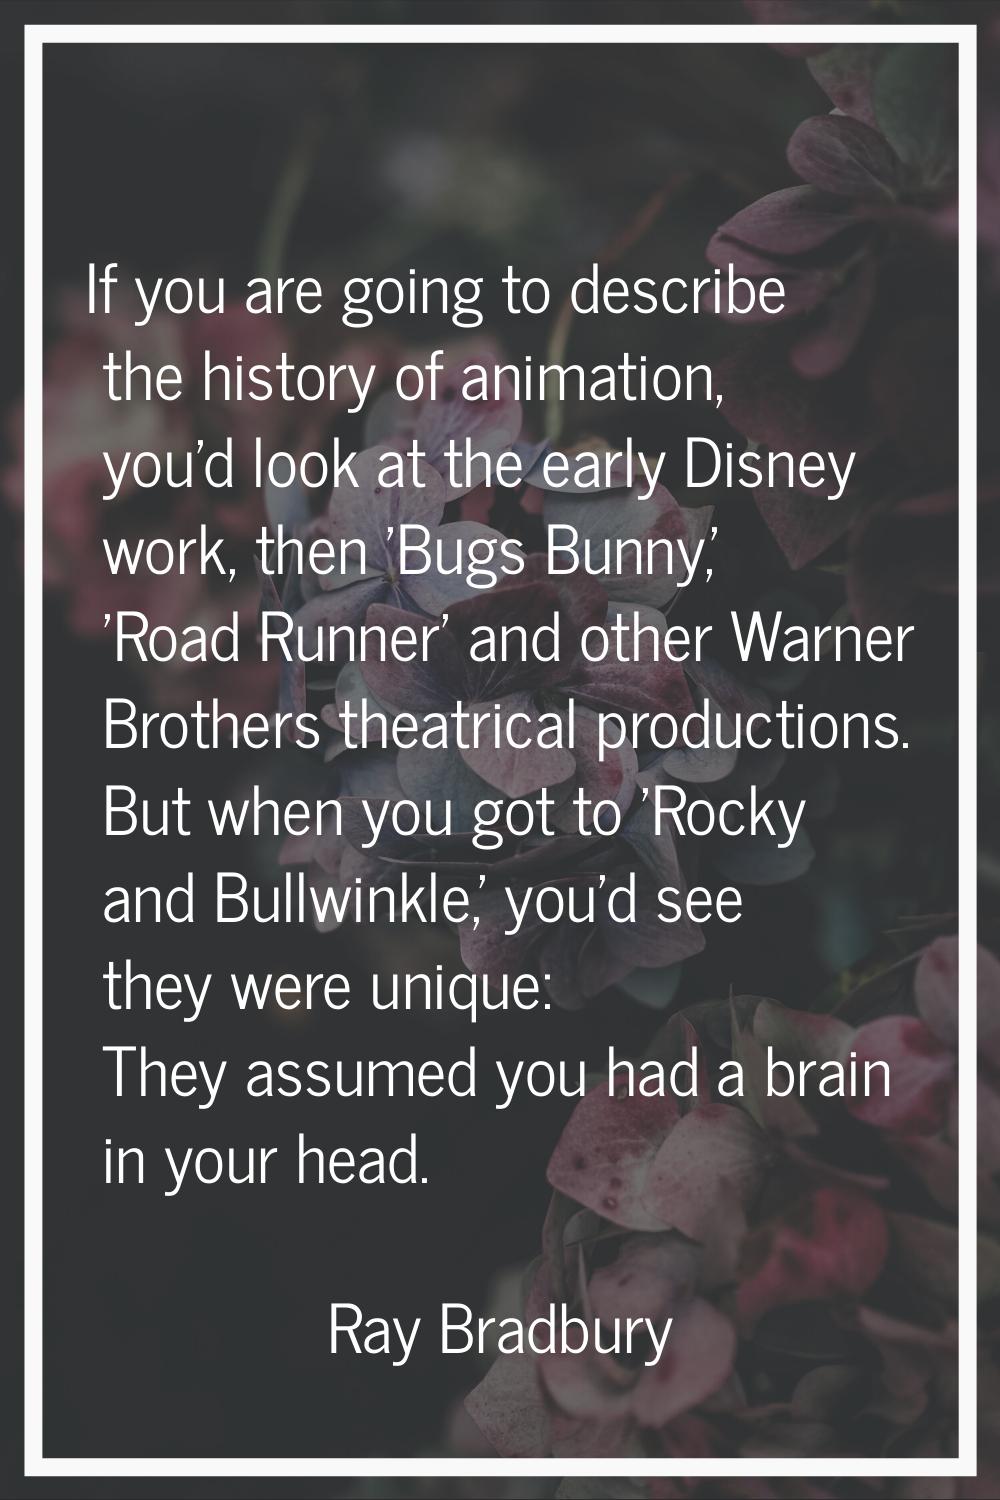 If you are going to describe the history of animation, you'd look at the early Disney work, then 'B